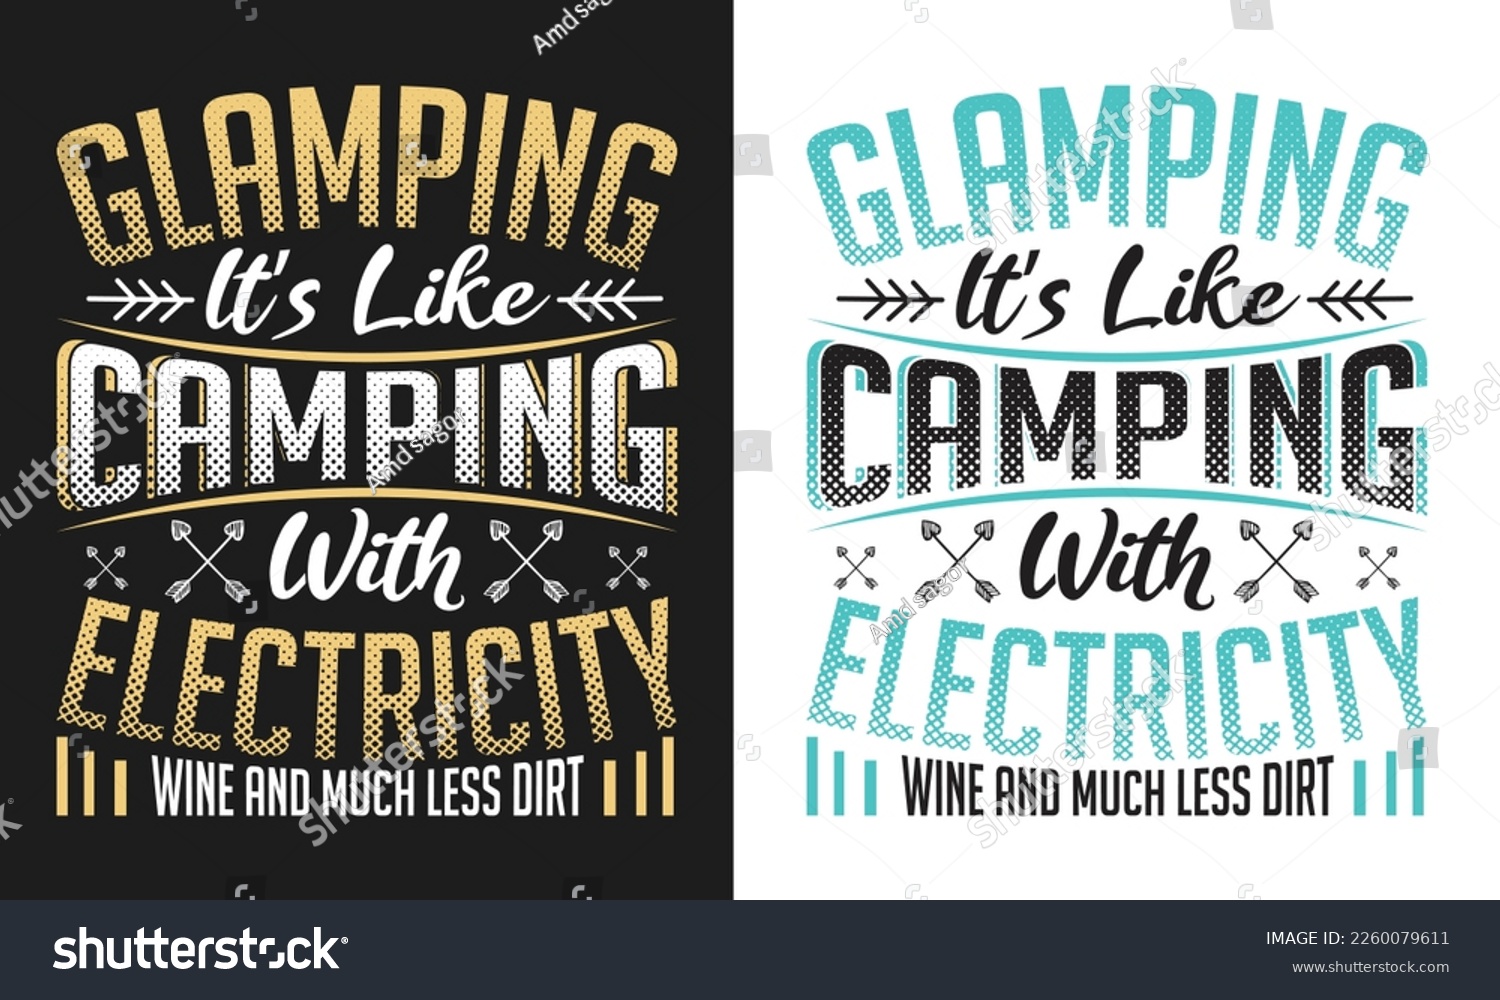 SVG of GLAMPING ITS LIKE CAMPING DESIGN svg